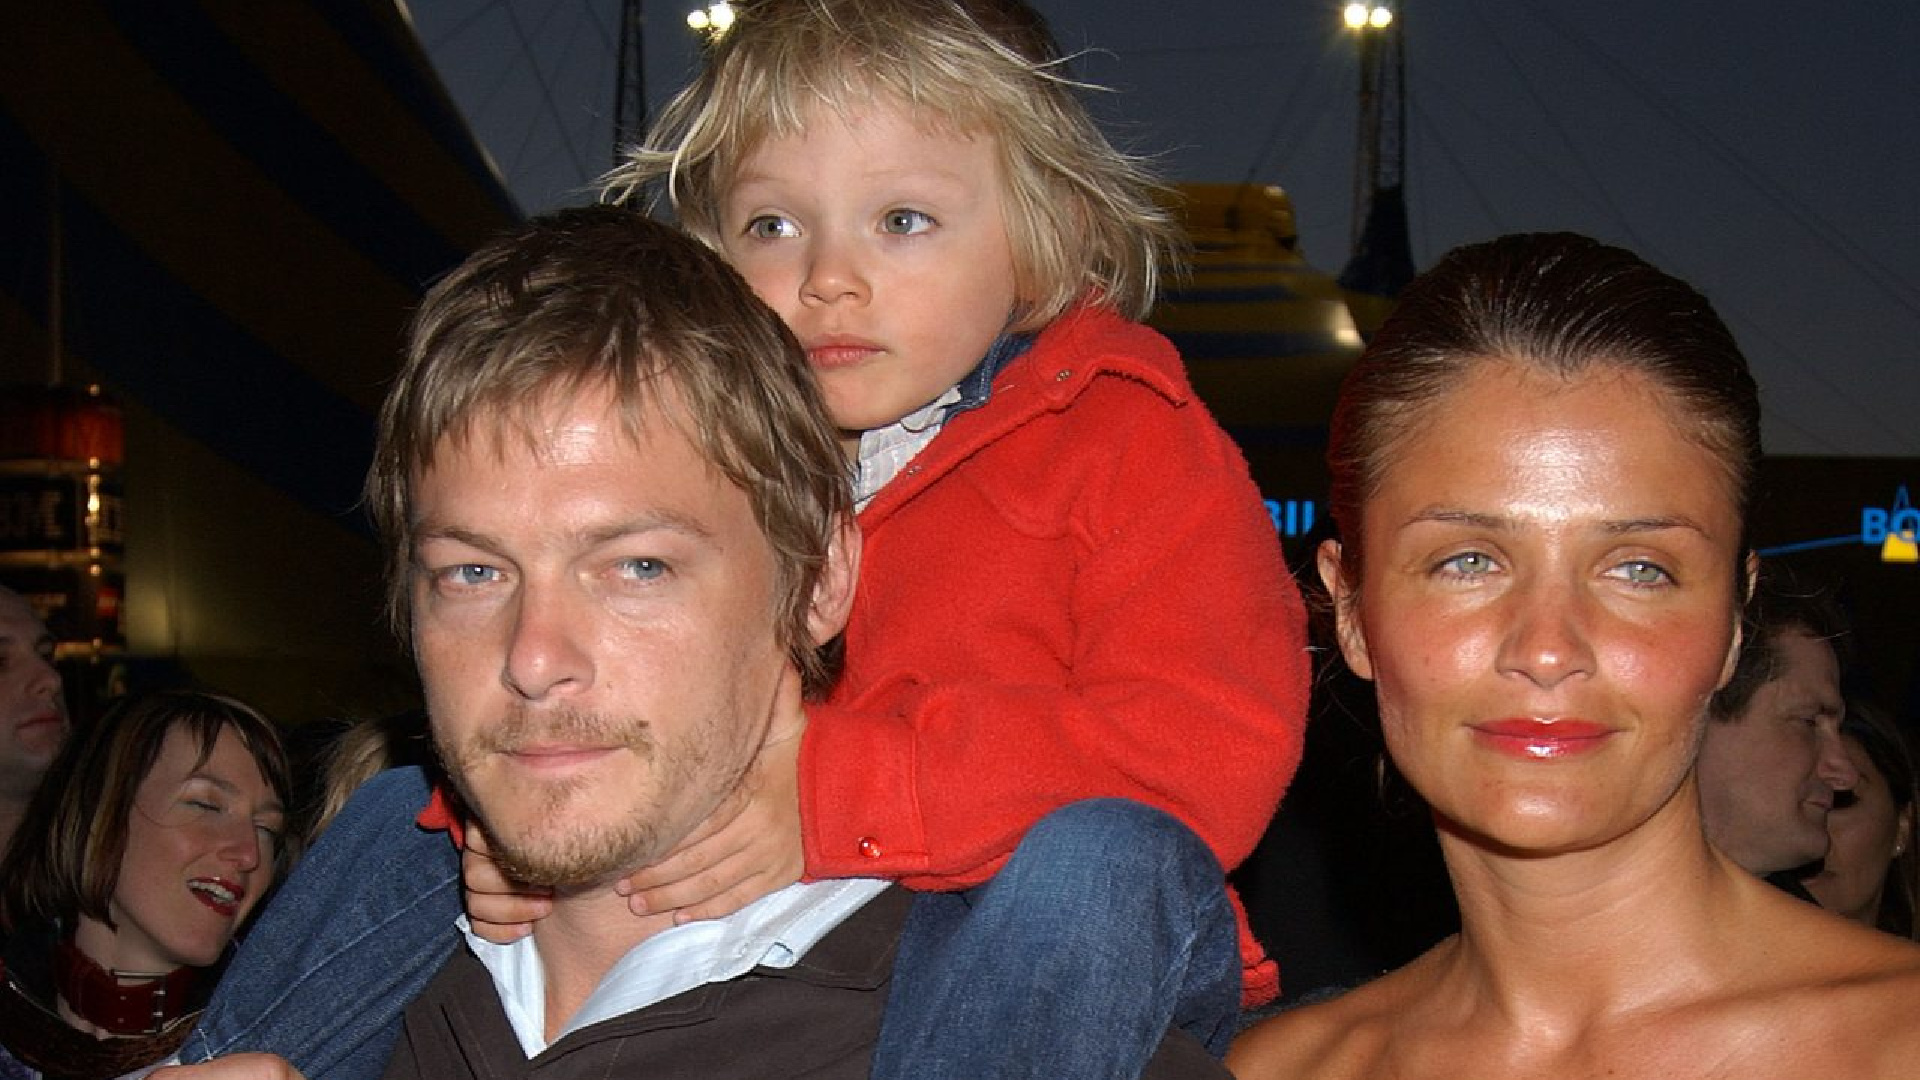 Meet Mingus, son of a famous actor and a model. Do you know who they are?